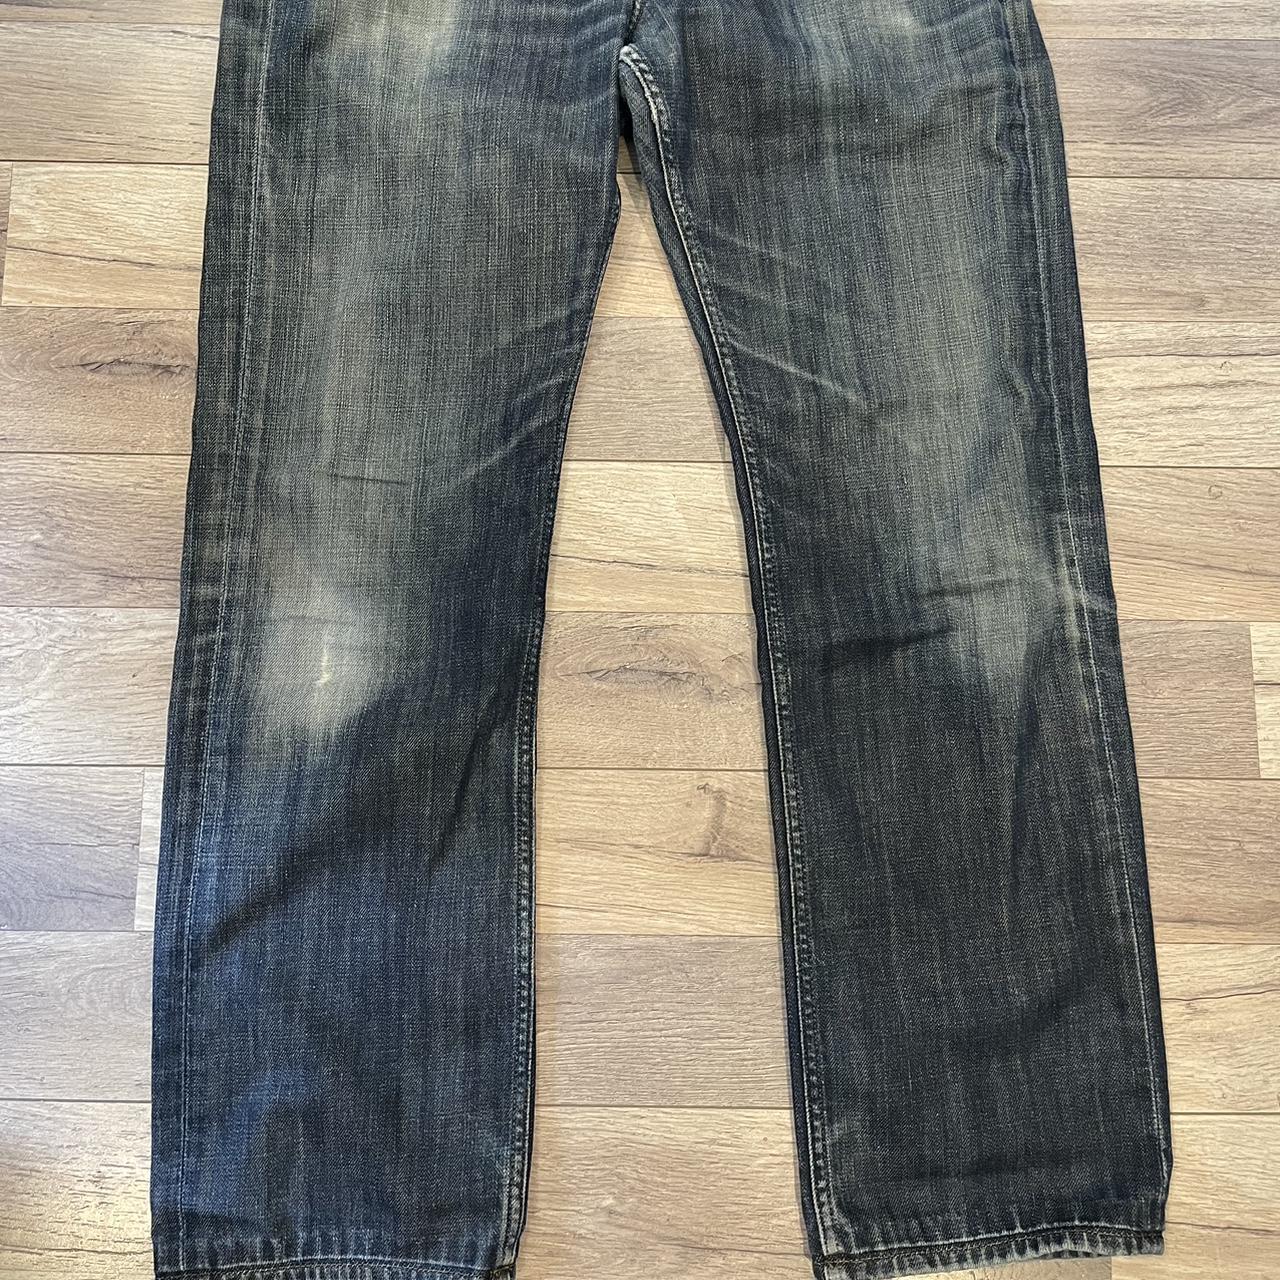 Burberry Brit Men's Navy and Blue Jeans